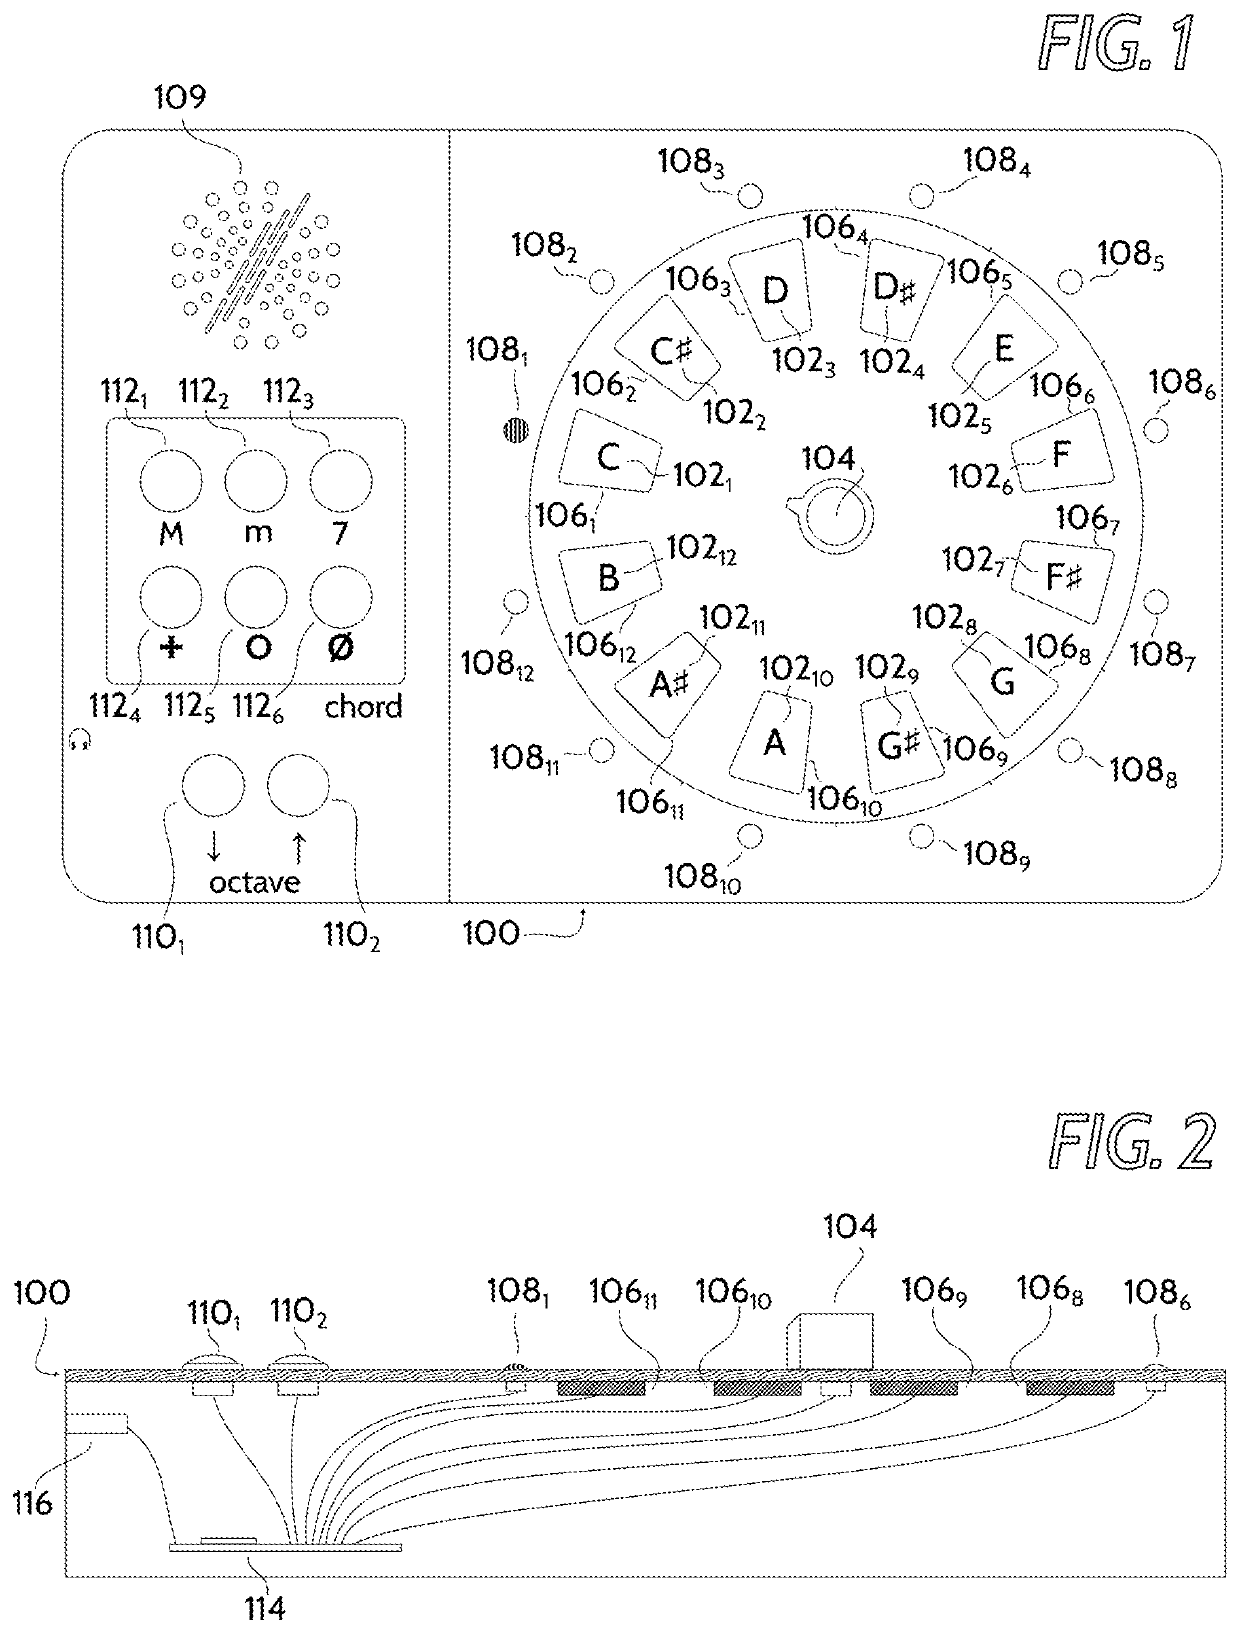 Apparatus and method for visual and audible demonstration of musical concepts